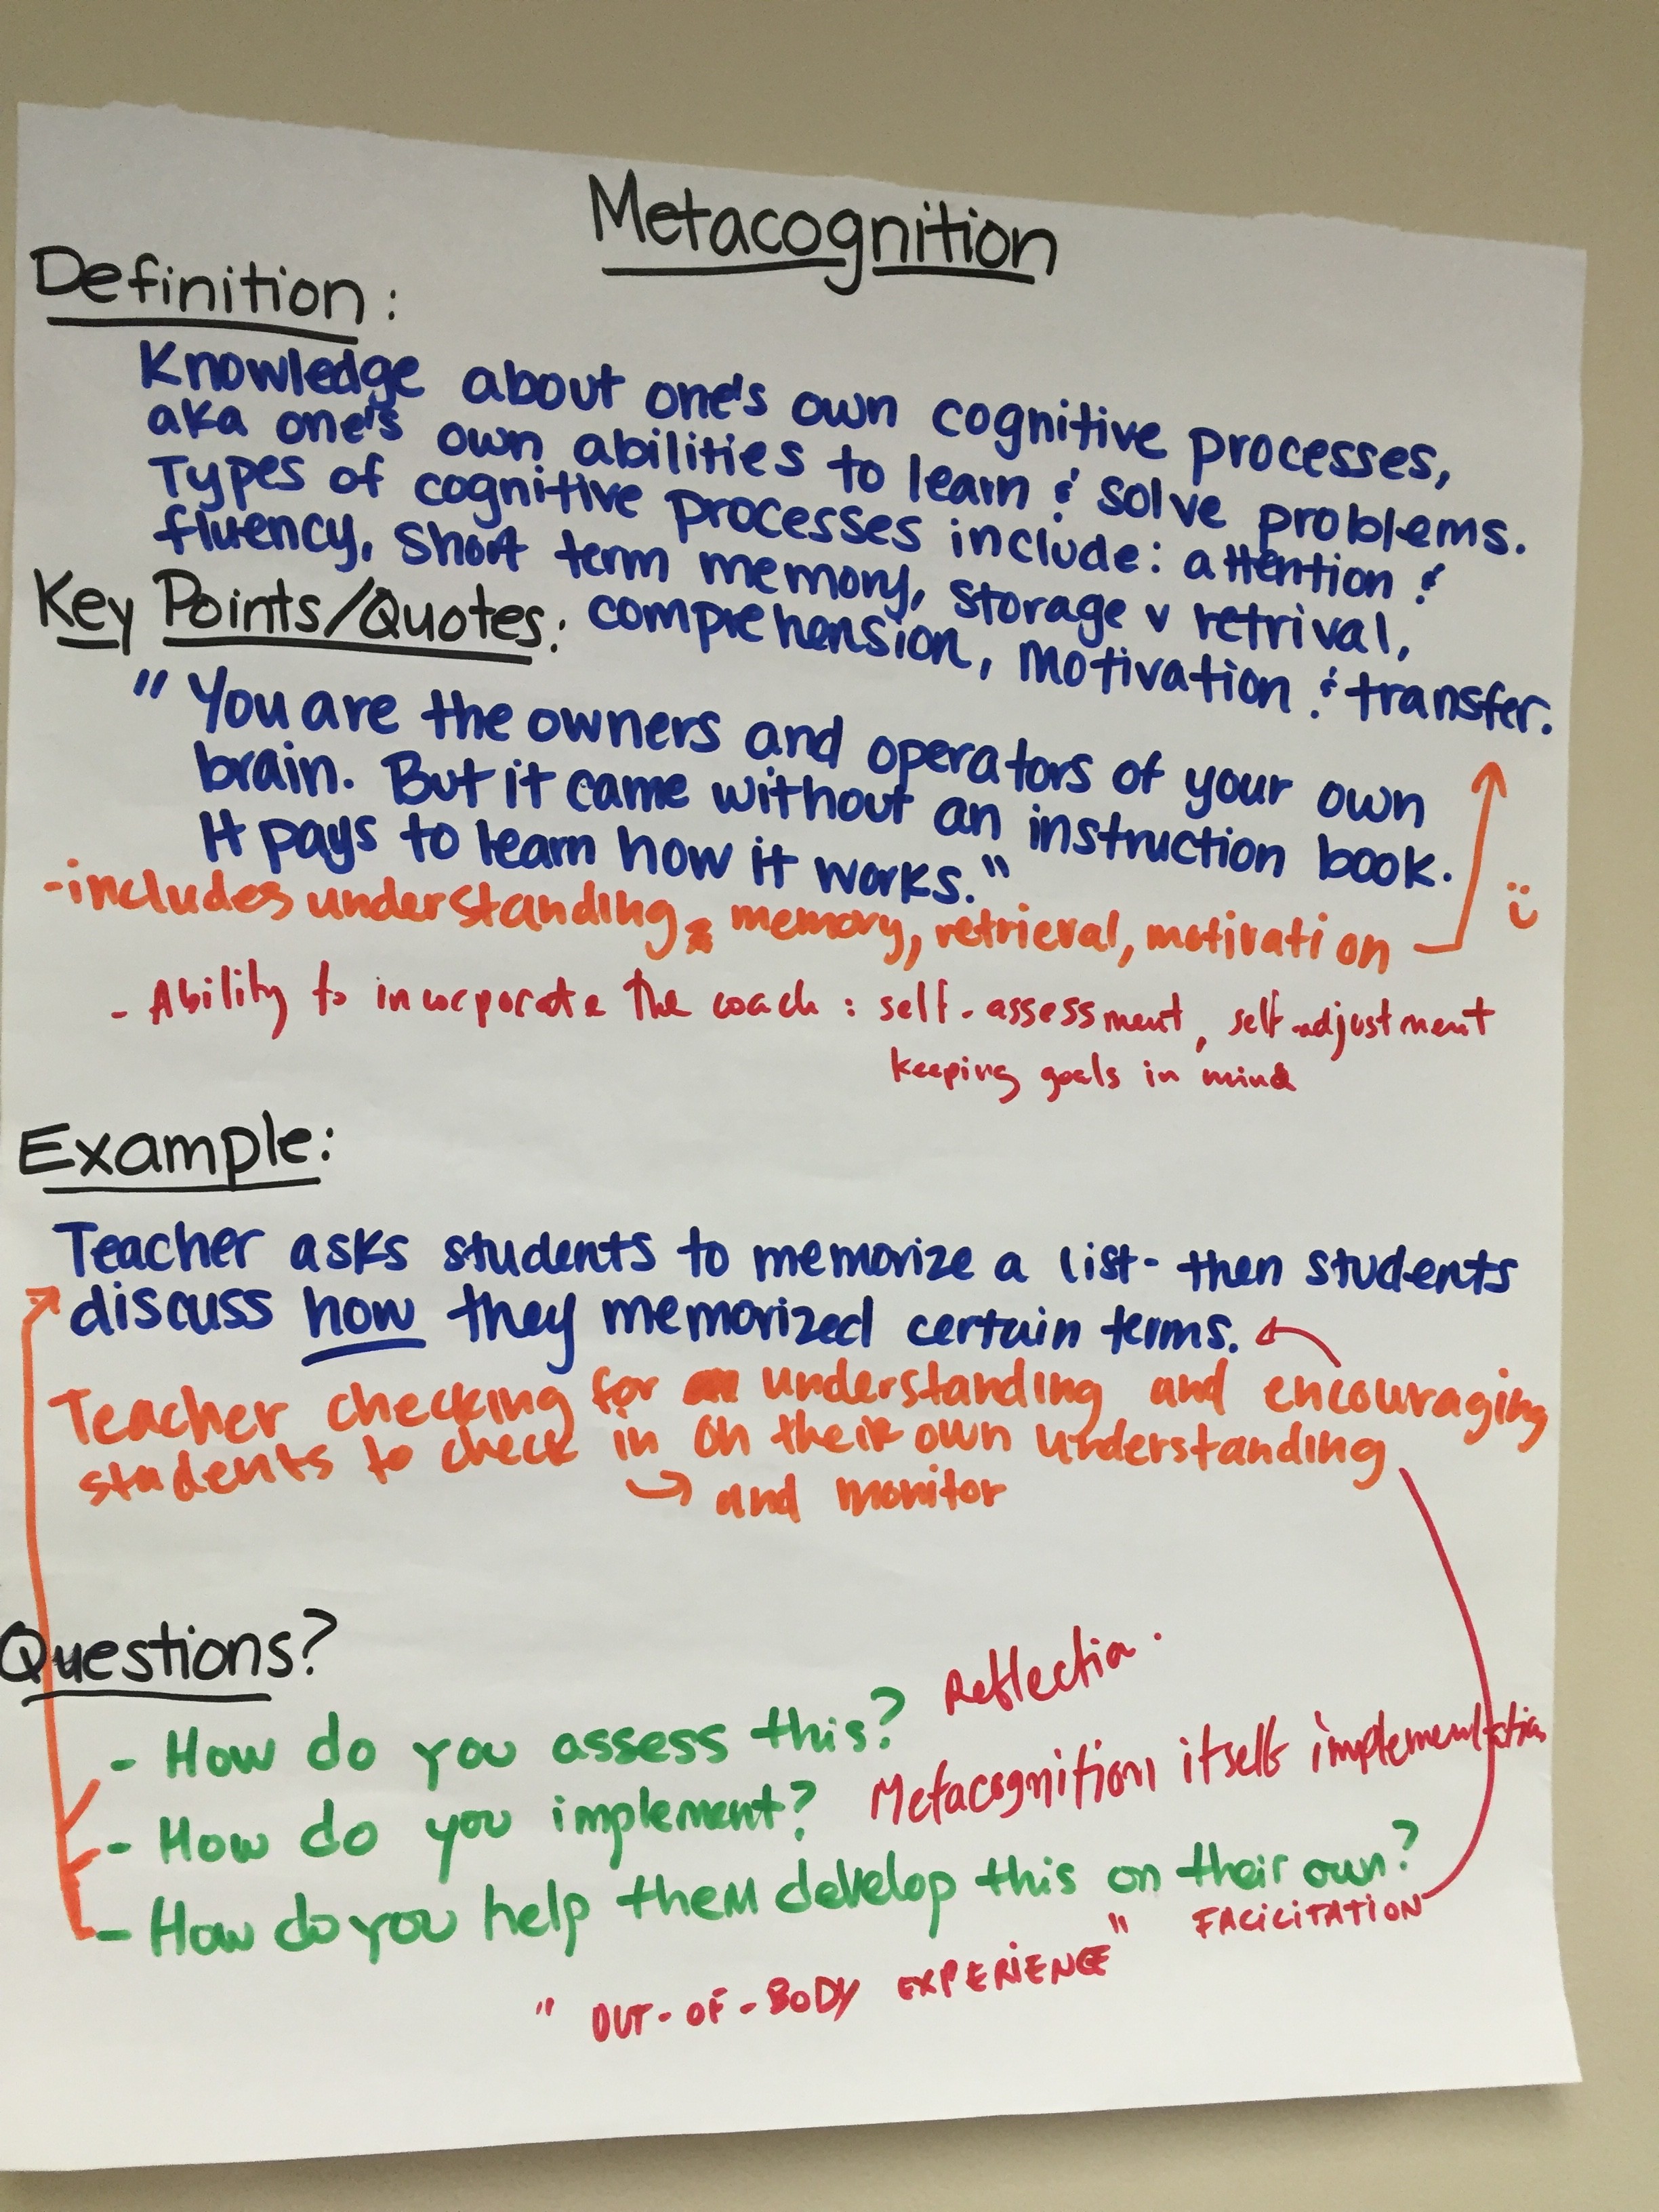 Metacognition+Poster